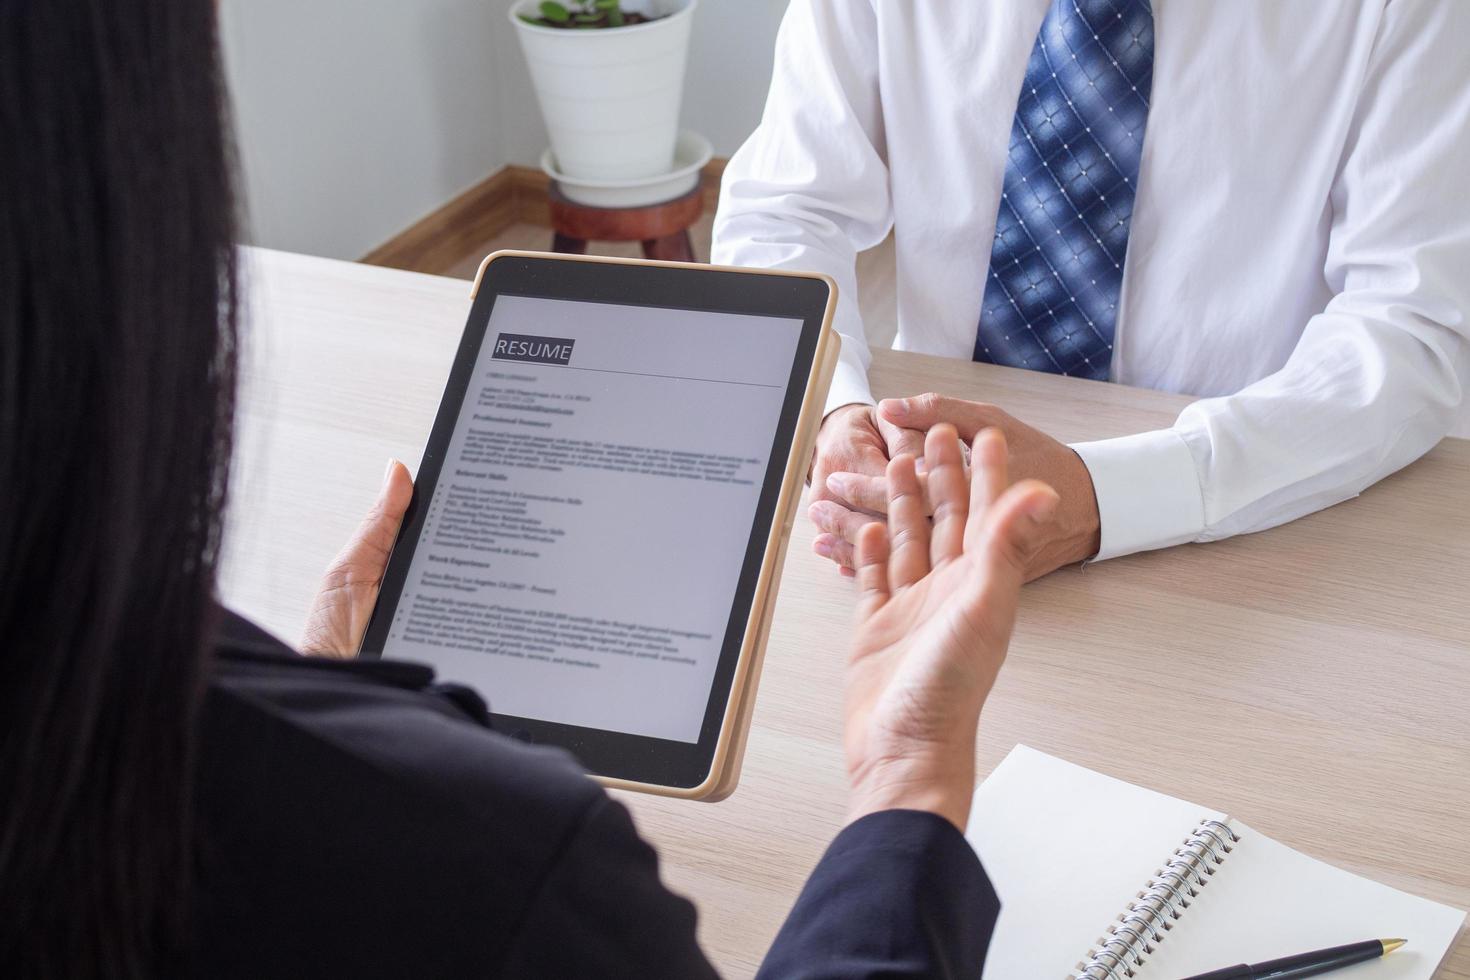 Businessmen open the resume for the applicant in an email via tablet during a job interview. Employment concept photo